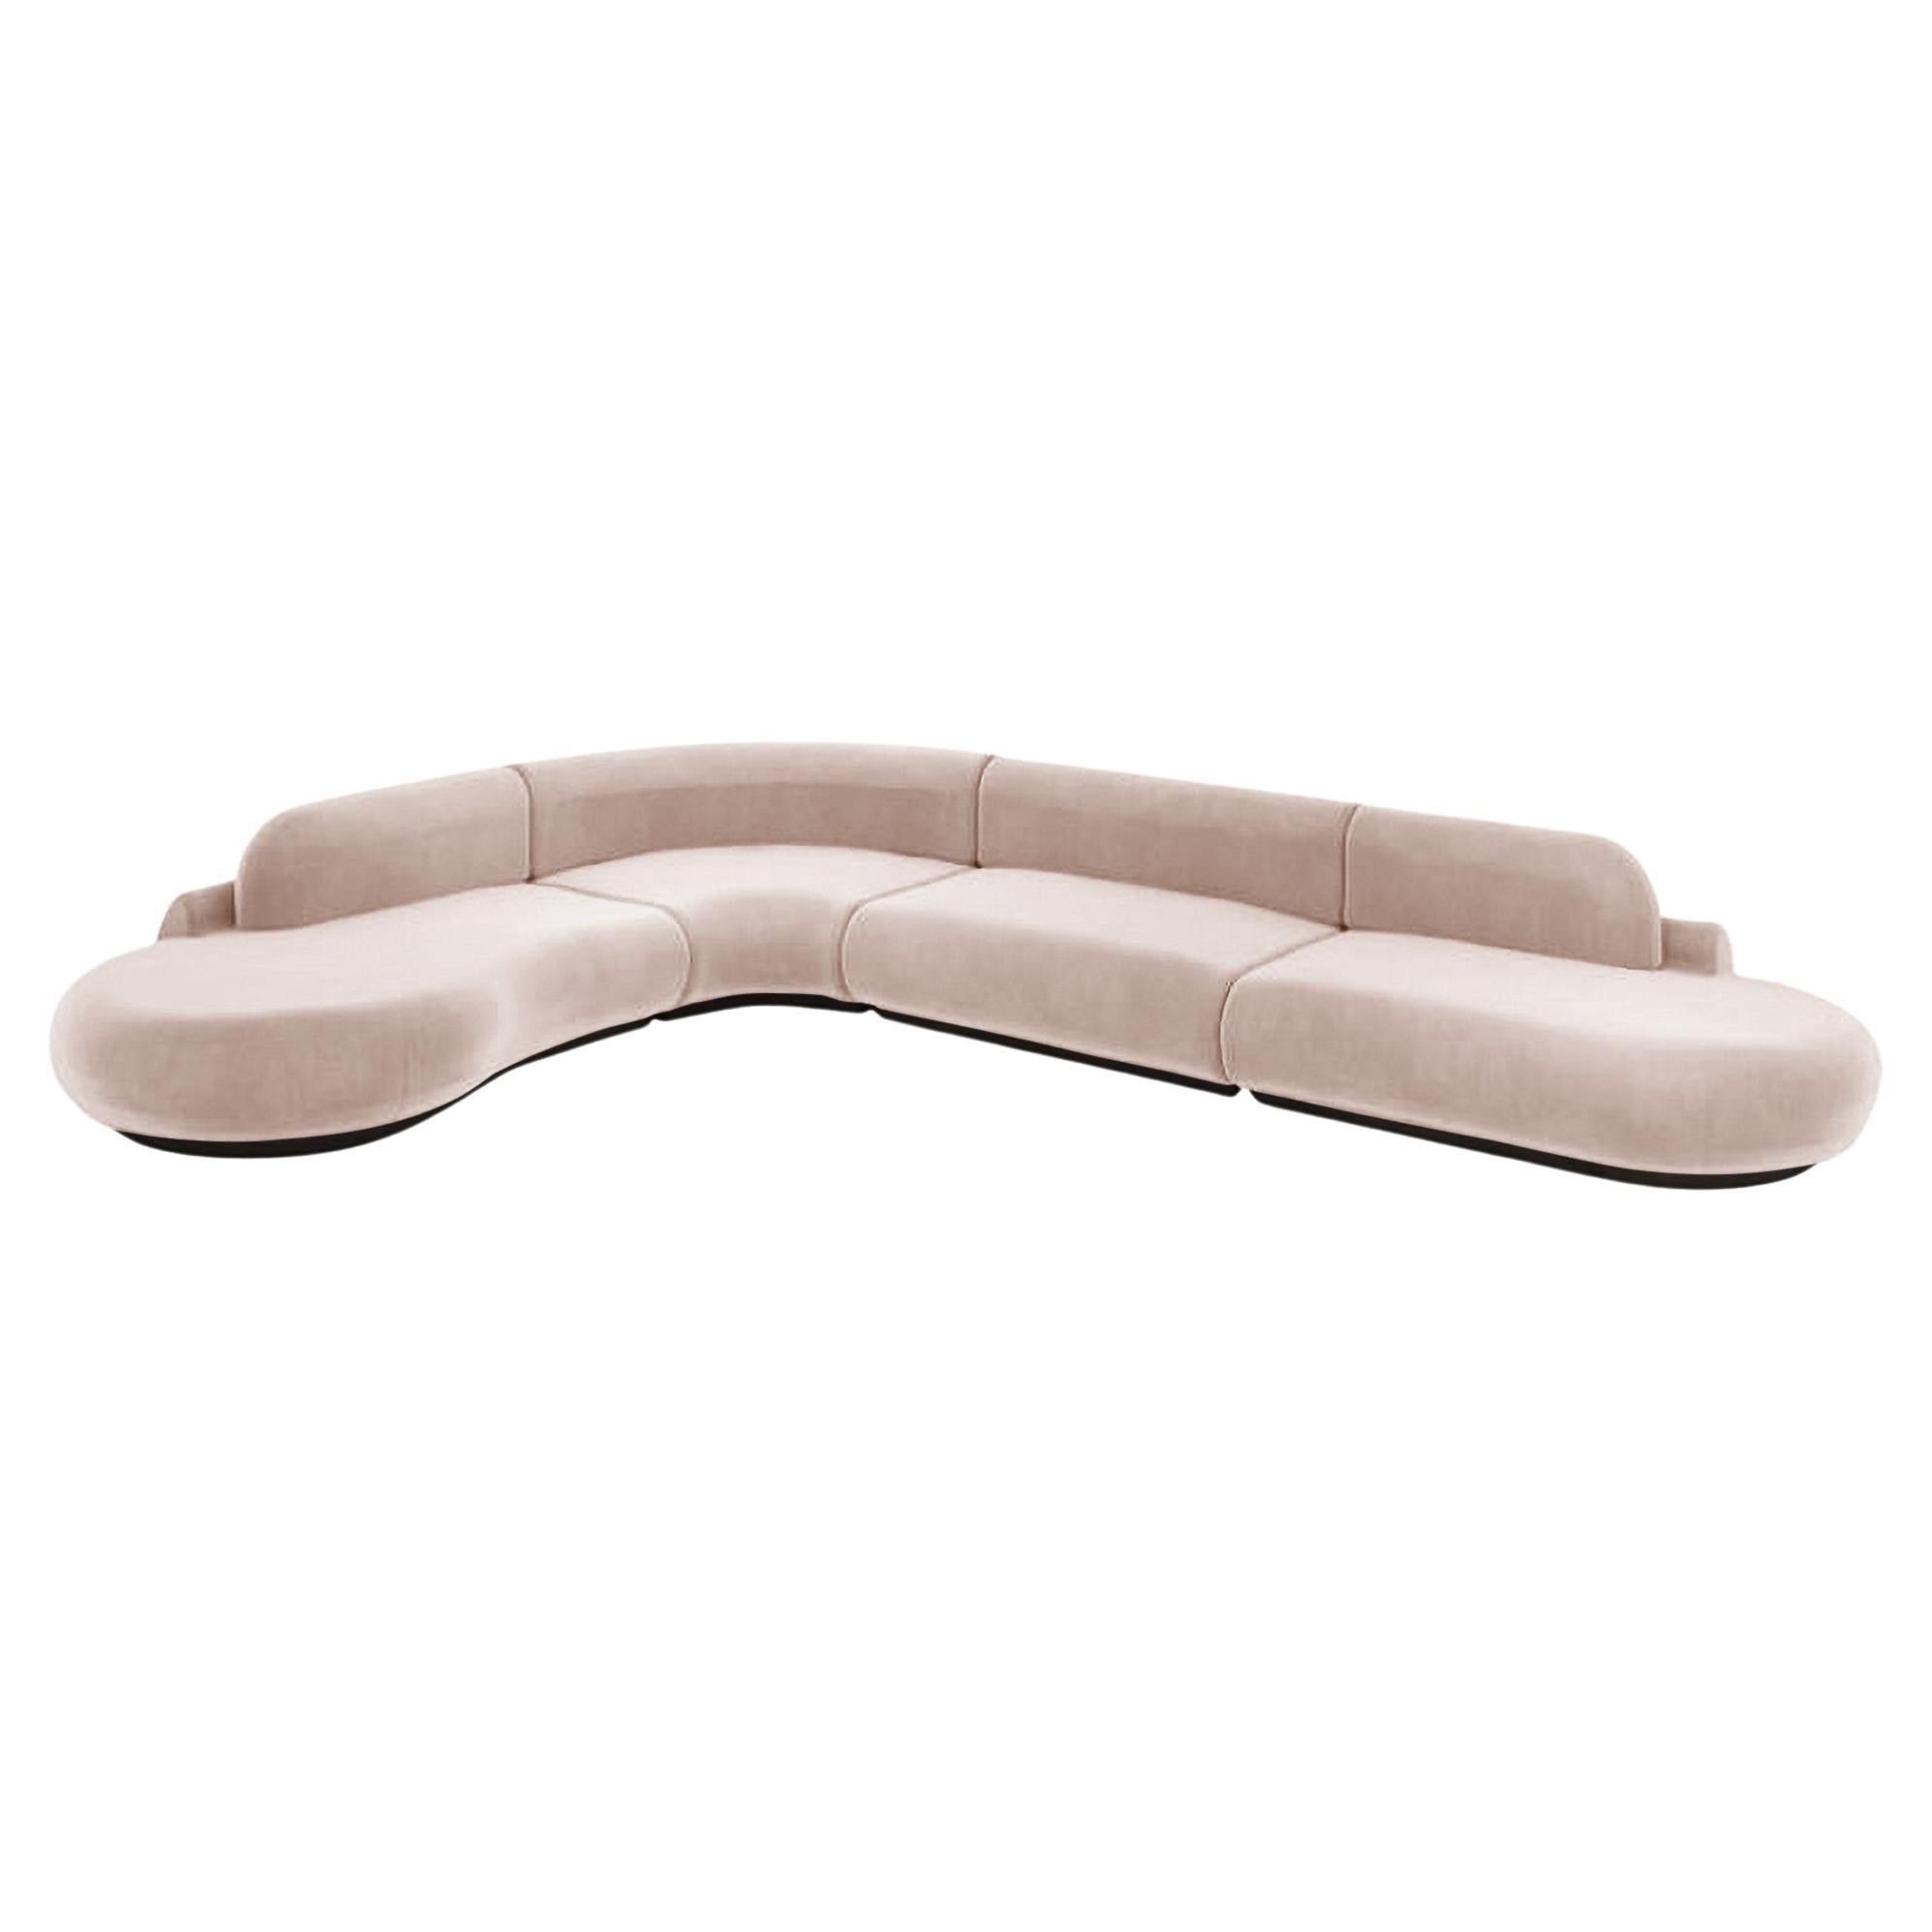 Naked Curved Sectional Sofa, 4 Piece with Beech Ash-056-5 and Vigo Blossom For Sale